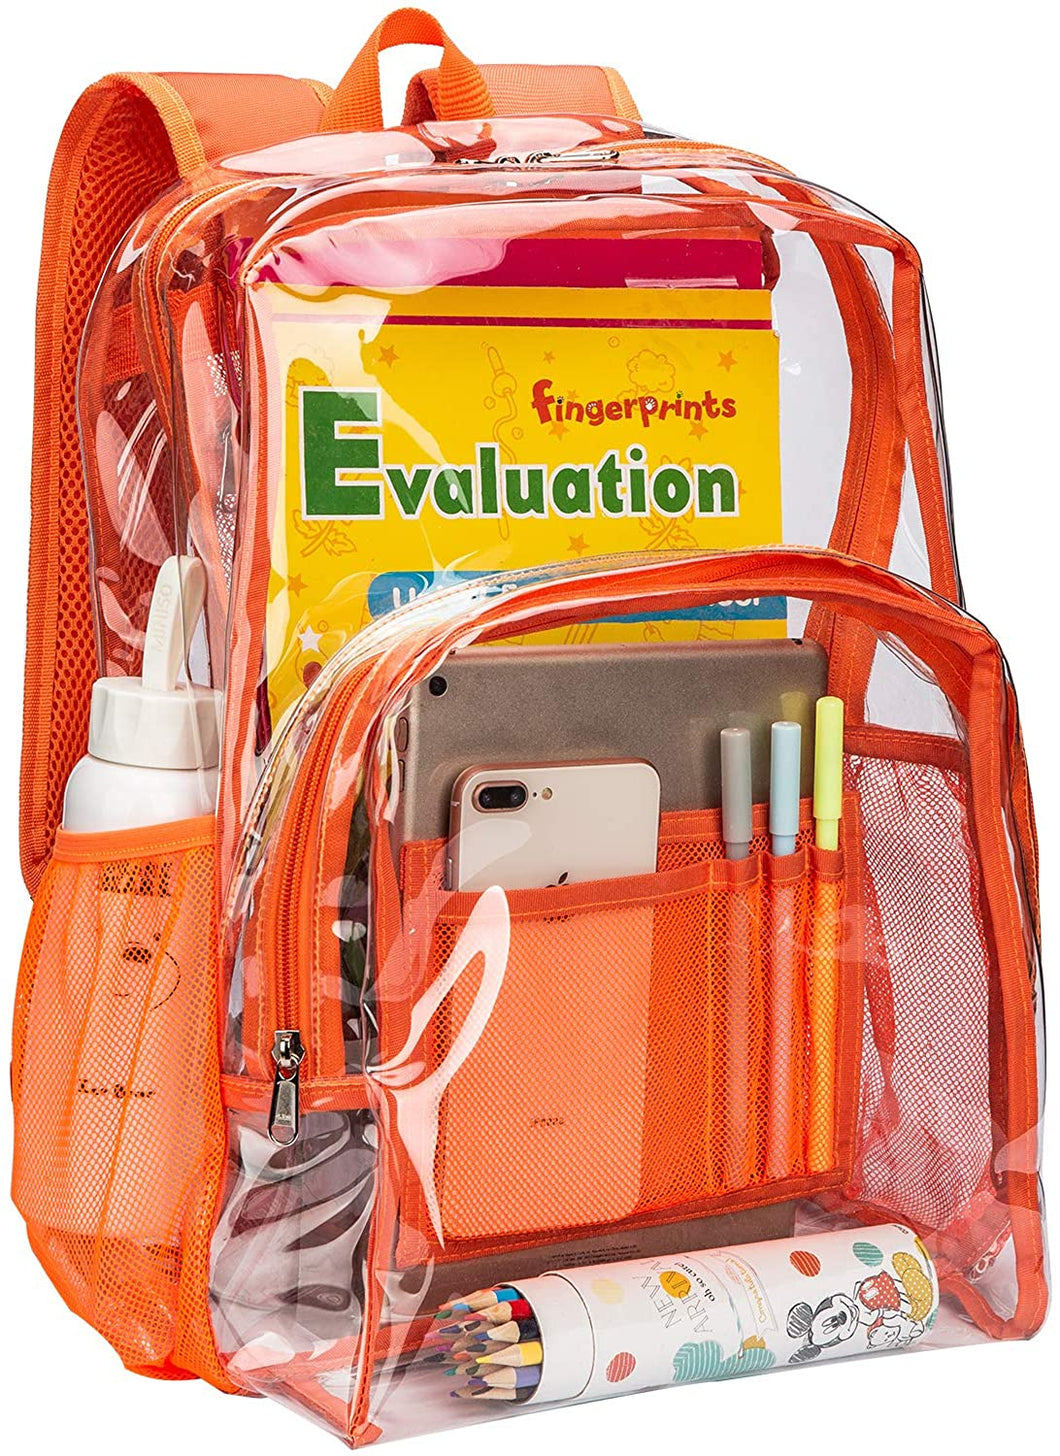 Classic Designs Orange Durable Heavy Duty Clear Backpack